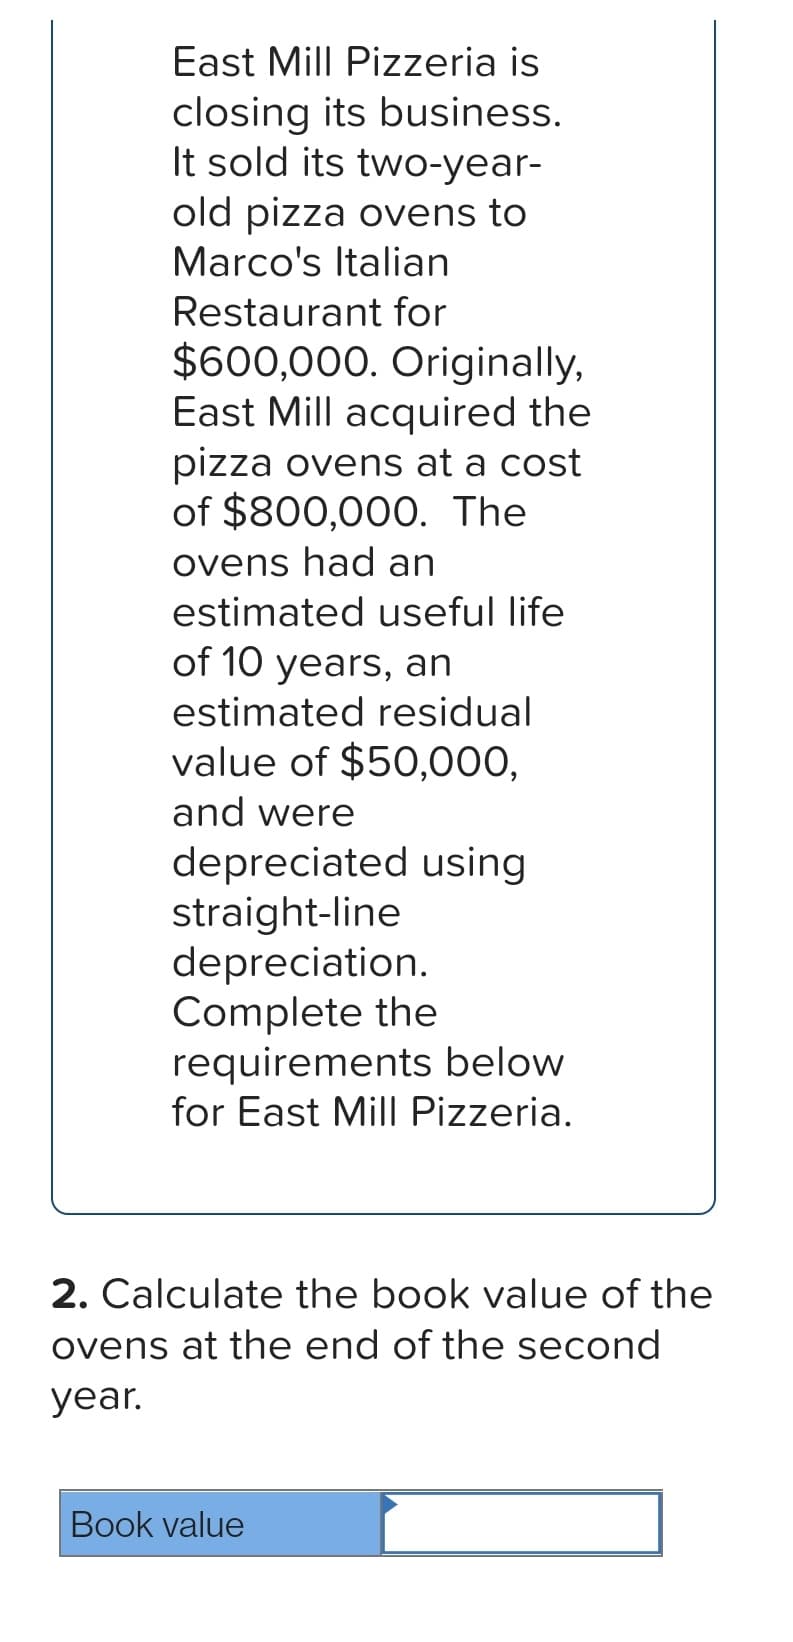 East Mill Pizzeria is
closing its business.
It sold its two-year-
old pizza ovens to
Marco's Italian
Restaurant for
$600,000. Originally,
East Mill acquired the
ost
pizza ovens at a
of $800,000. The
ovens had an
estimated useful life
of 10 years, an
estimated residual
value of $50,000,
and were
depreciated using
straight-line
depreciation.
Complete the
requirements below
for East Mill Pizzeria.
2. Calculate the book value of the
ovens at the end of the second
year.
Book value
